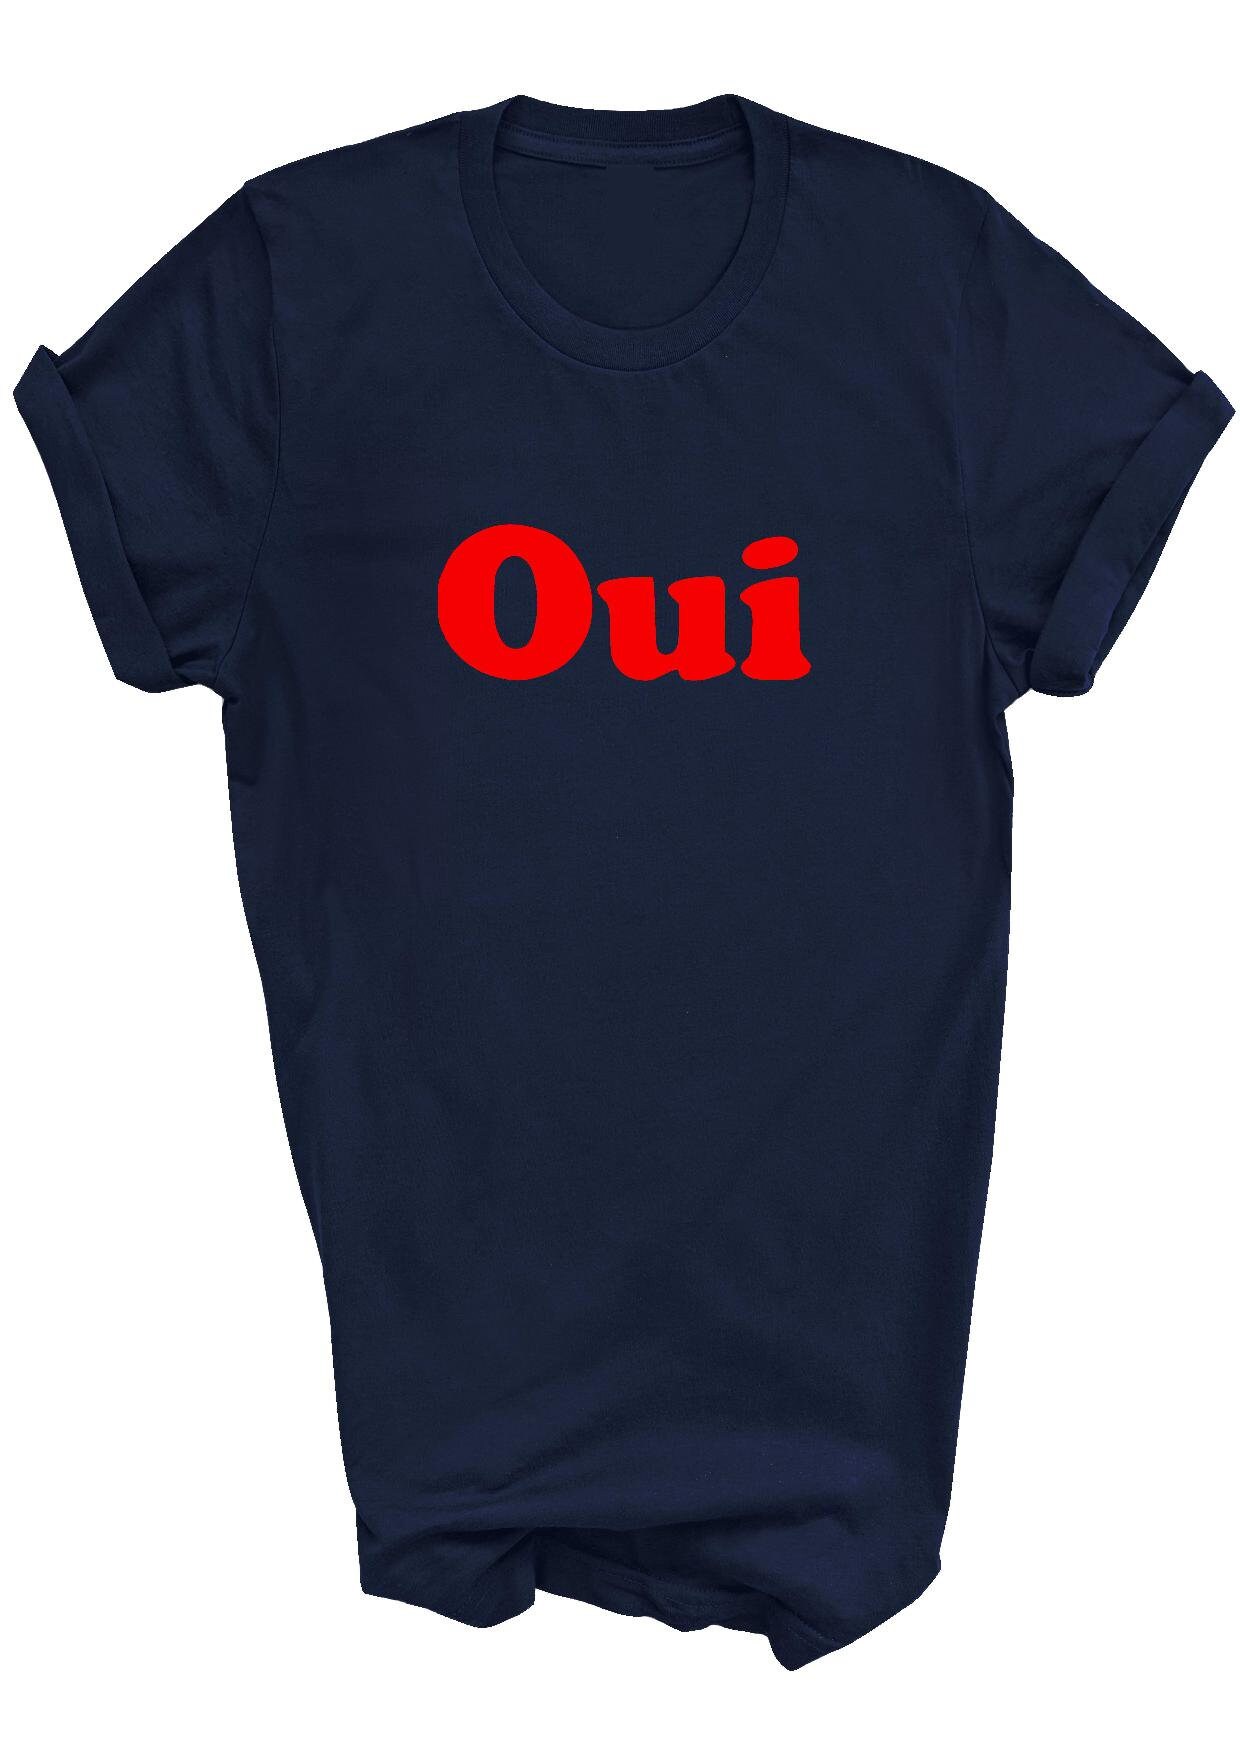 Oui T-shirt Red French Retro Slogan Hipster Tee Adult SM - Etsy UK